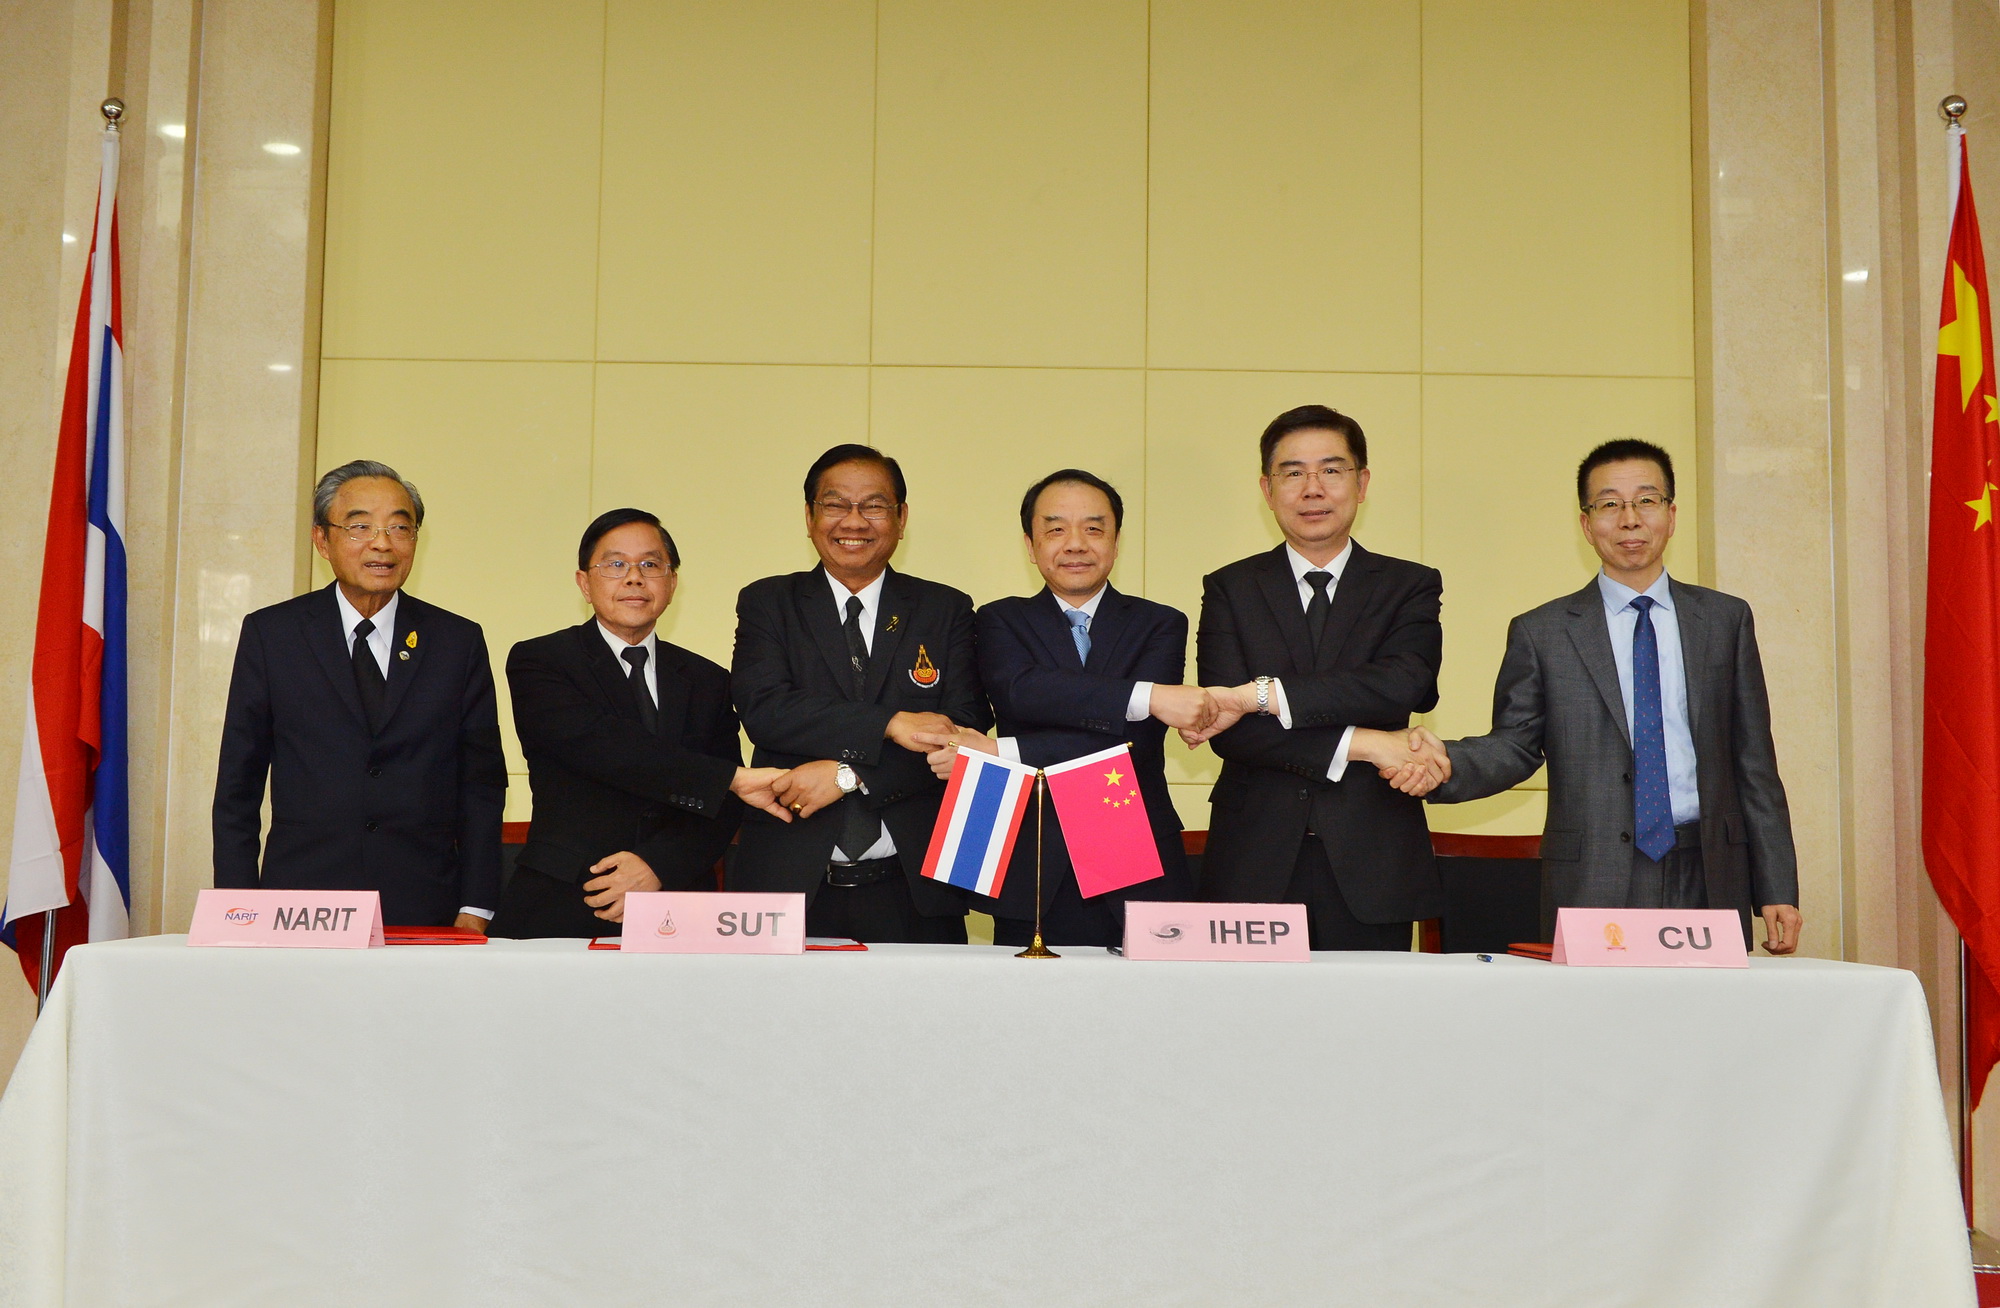 IHEP and CU, SUT and NARIT sign a Memorandum of Understanding for scientific collaboration (Image by IHEP)